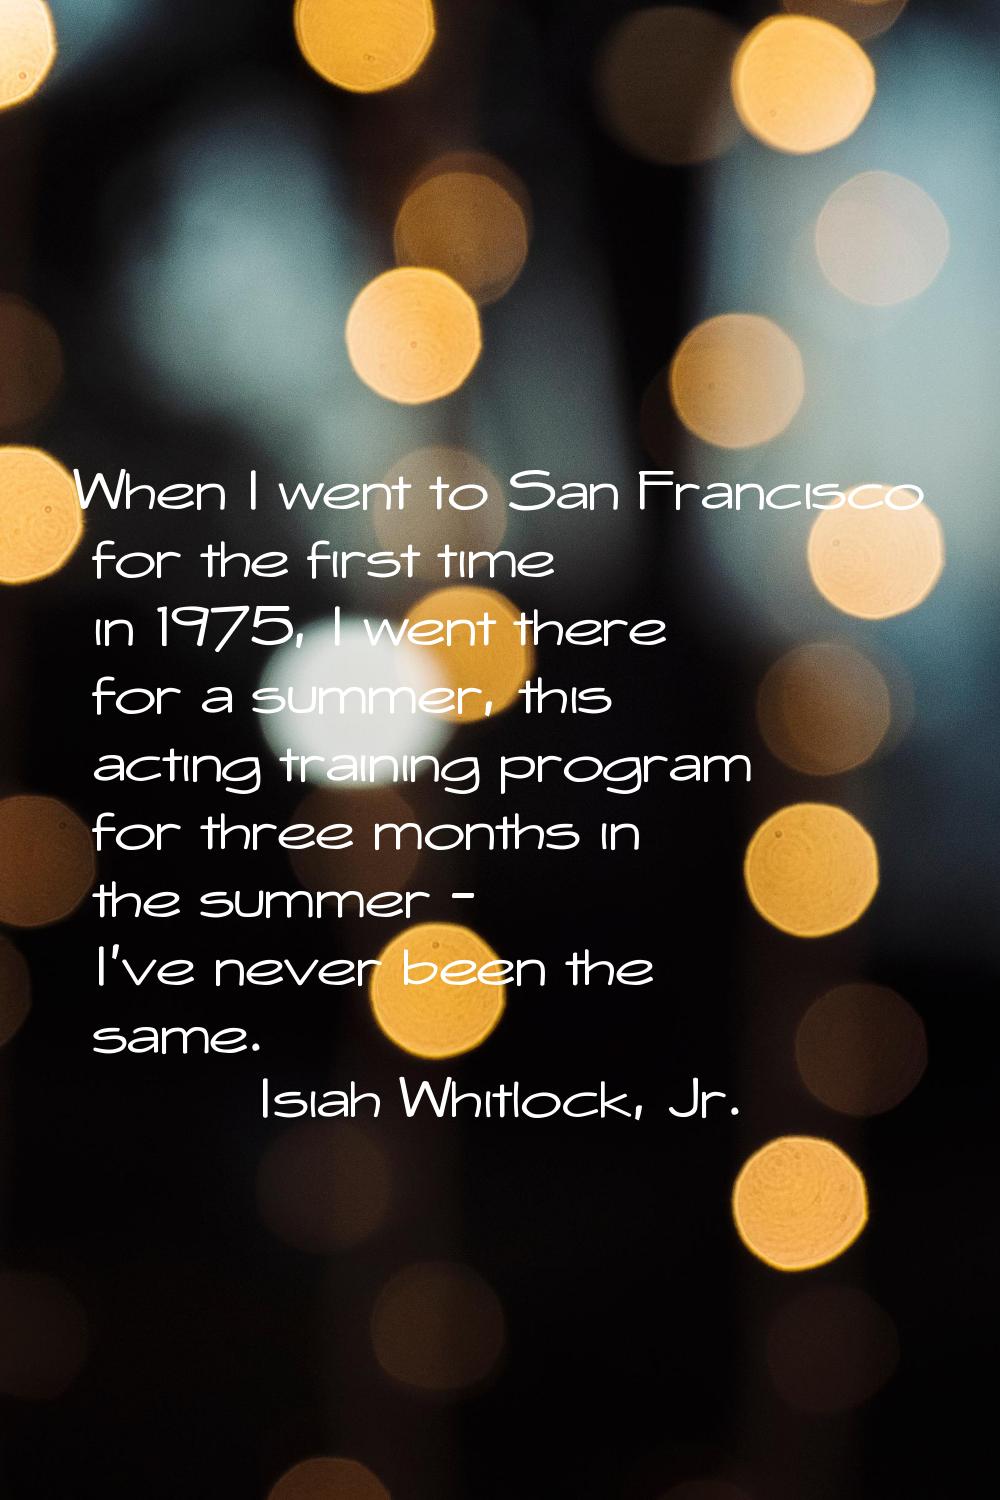 When I went to San Francisco for the first time in 1975, I went there for a summer, this acting tra